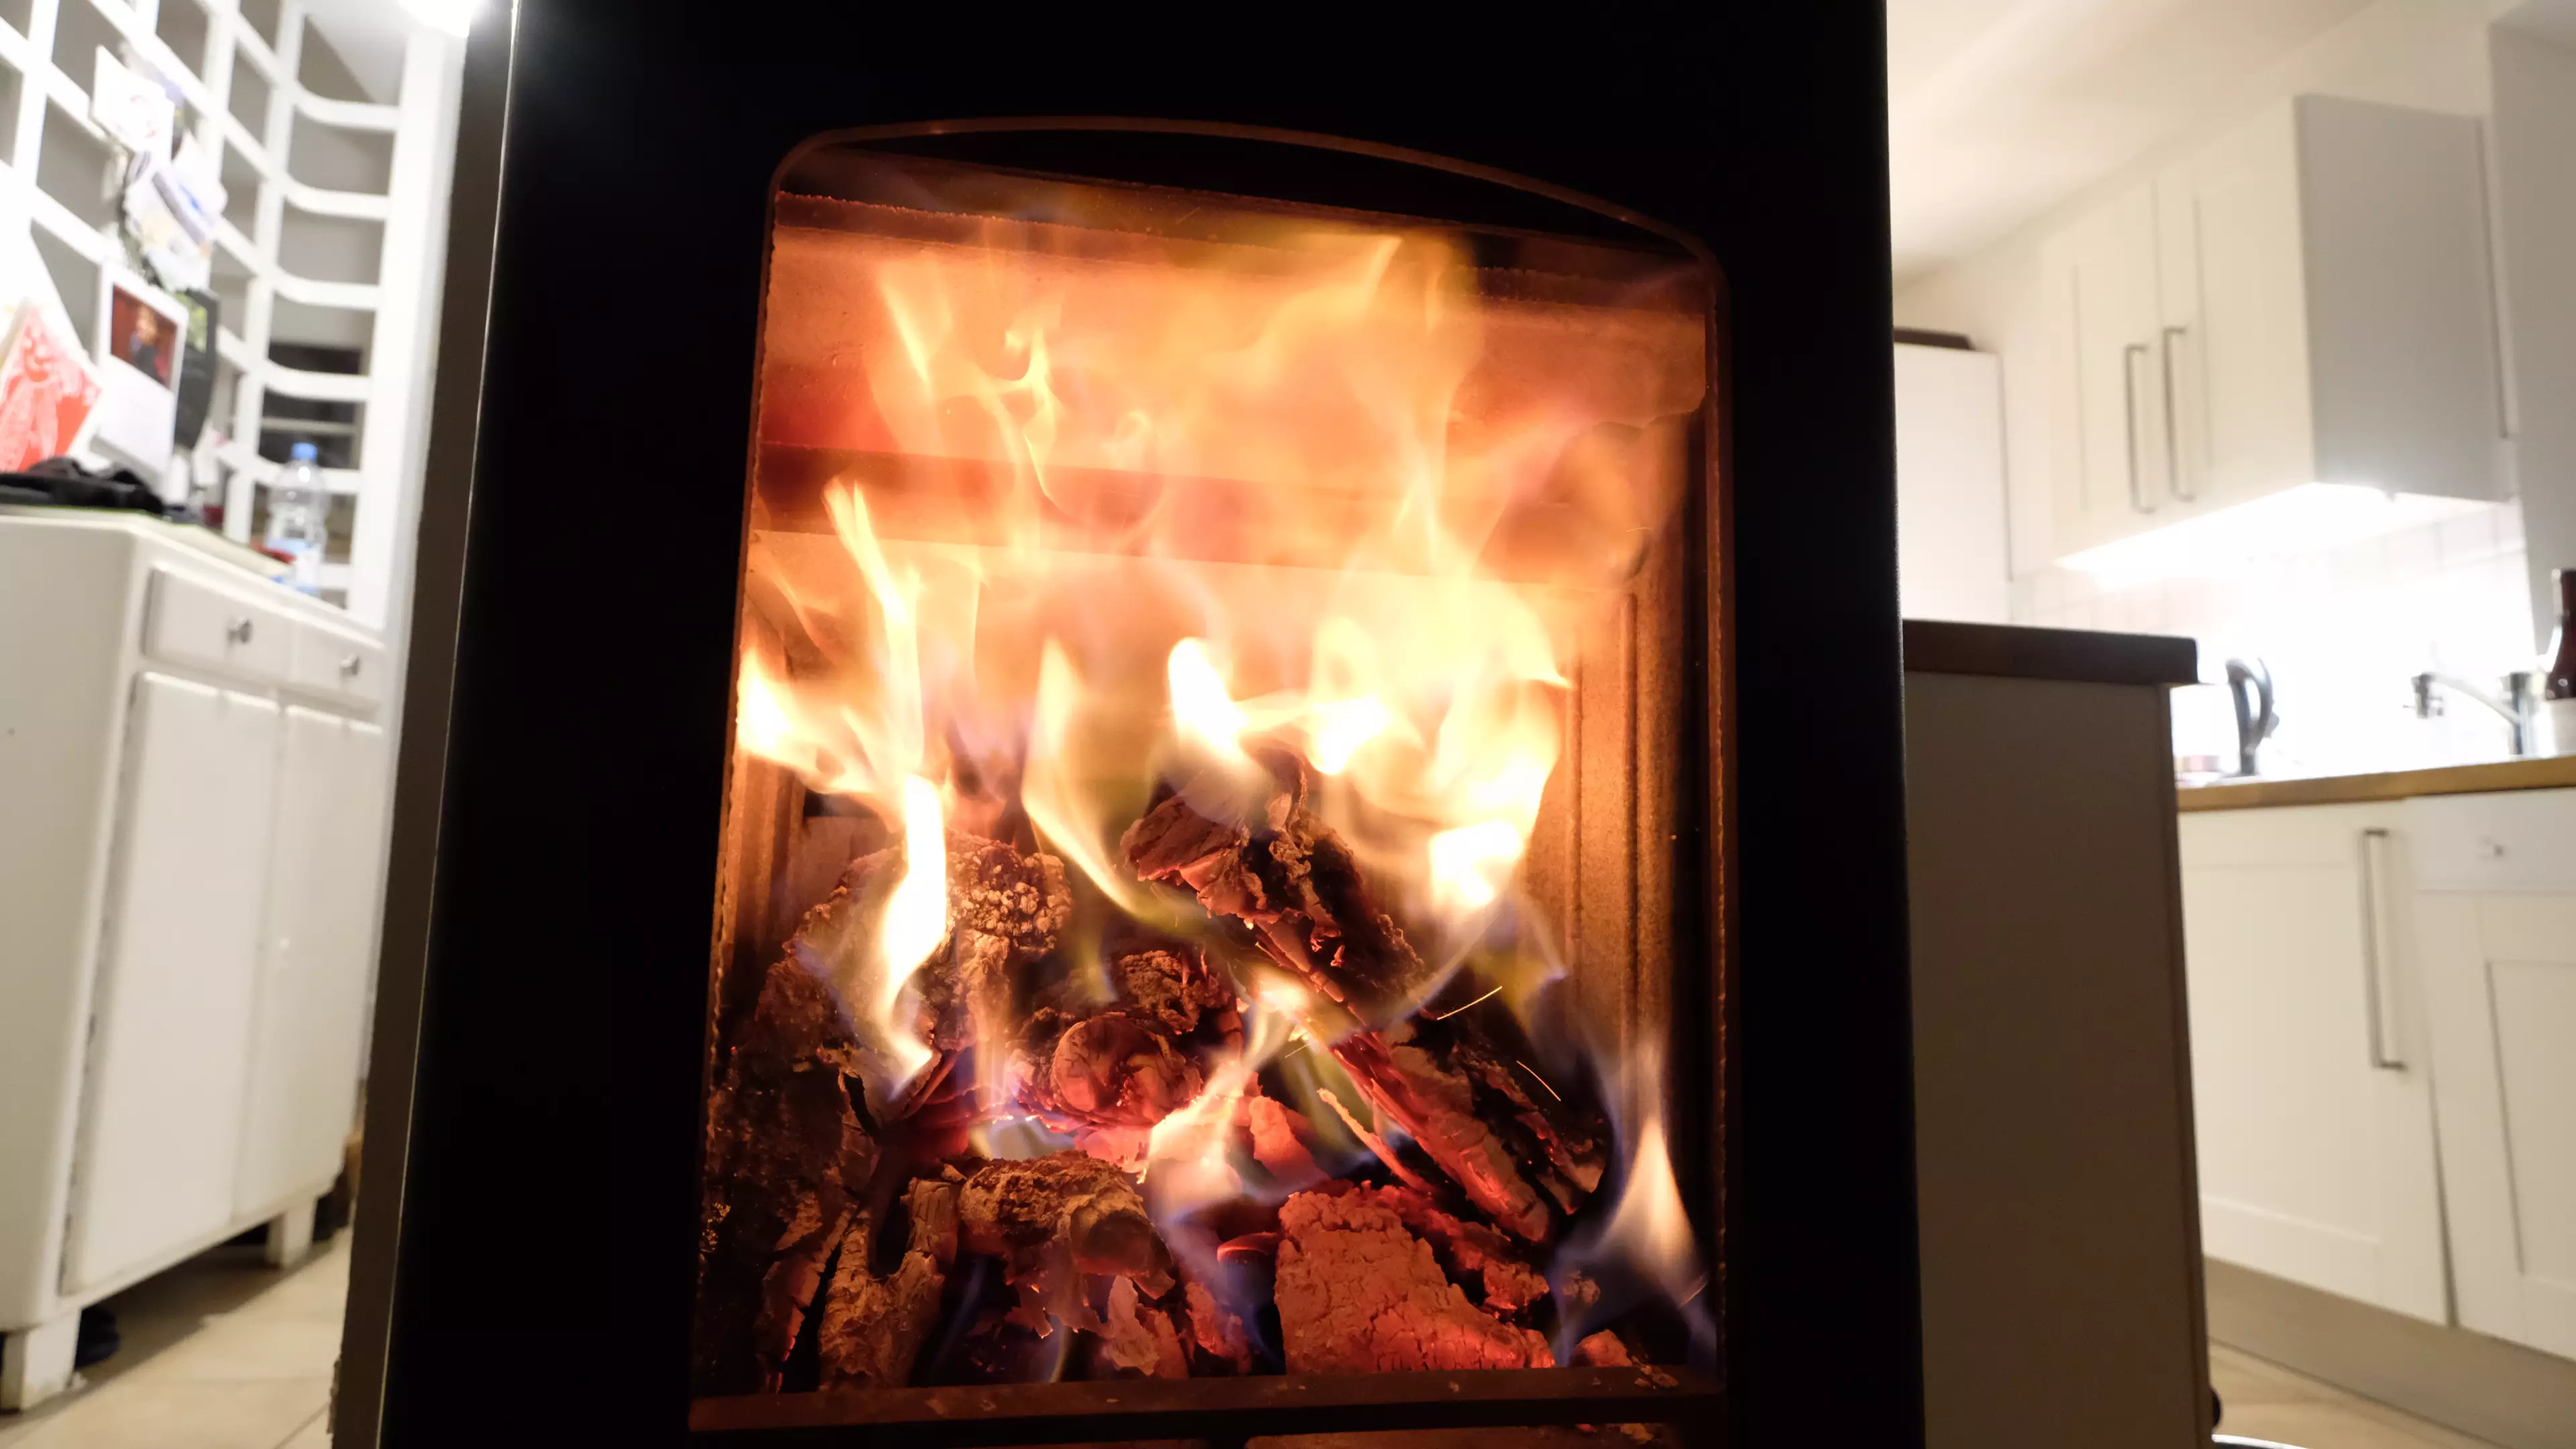 Get Your Jumpers Out Because London’s Mayor Is Proposing To Ban Fireplaces 